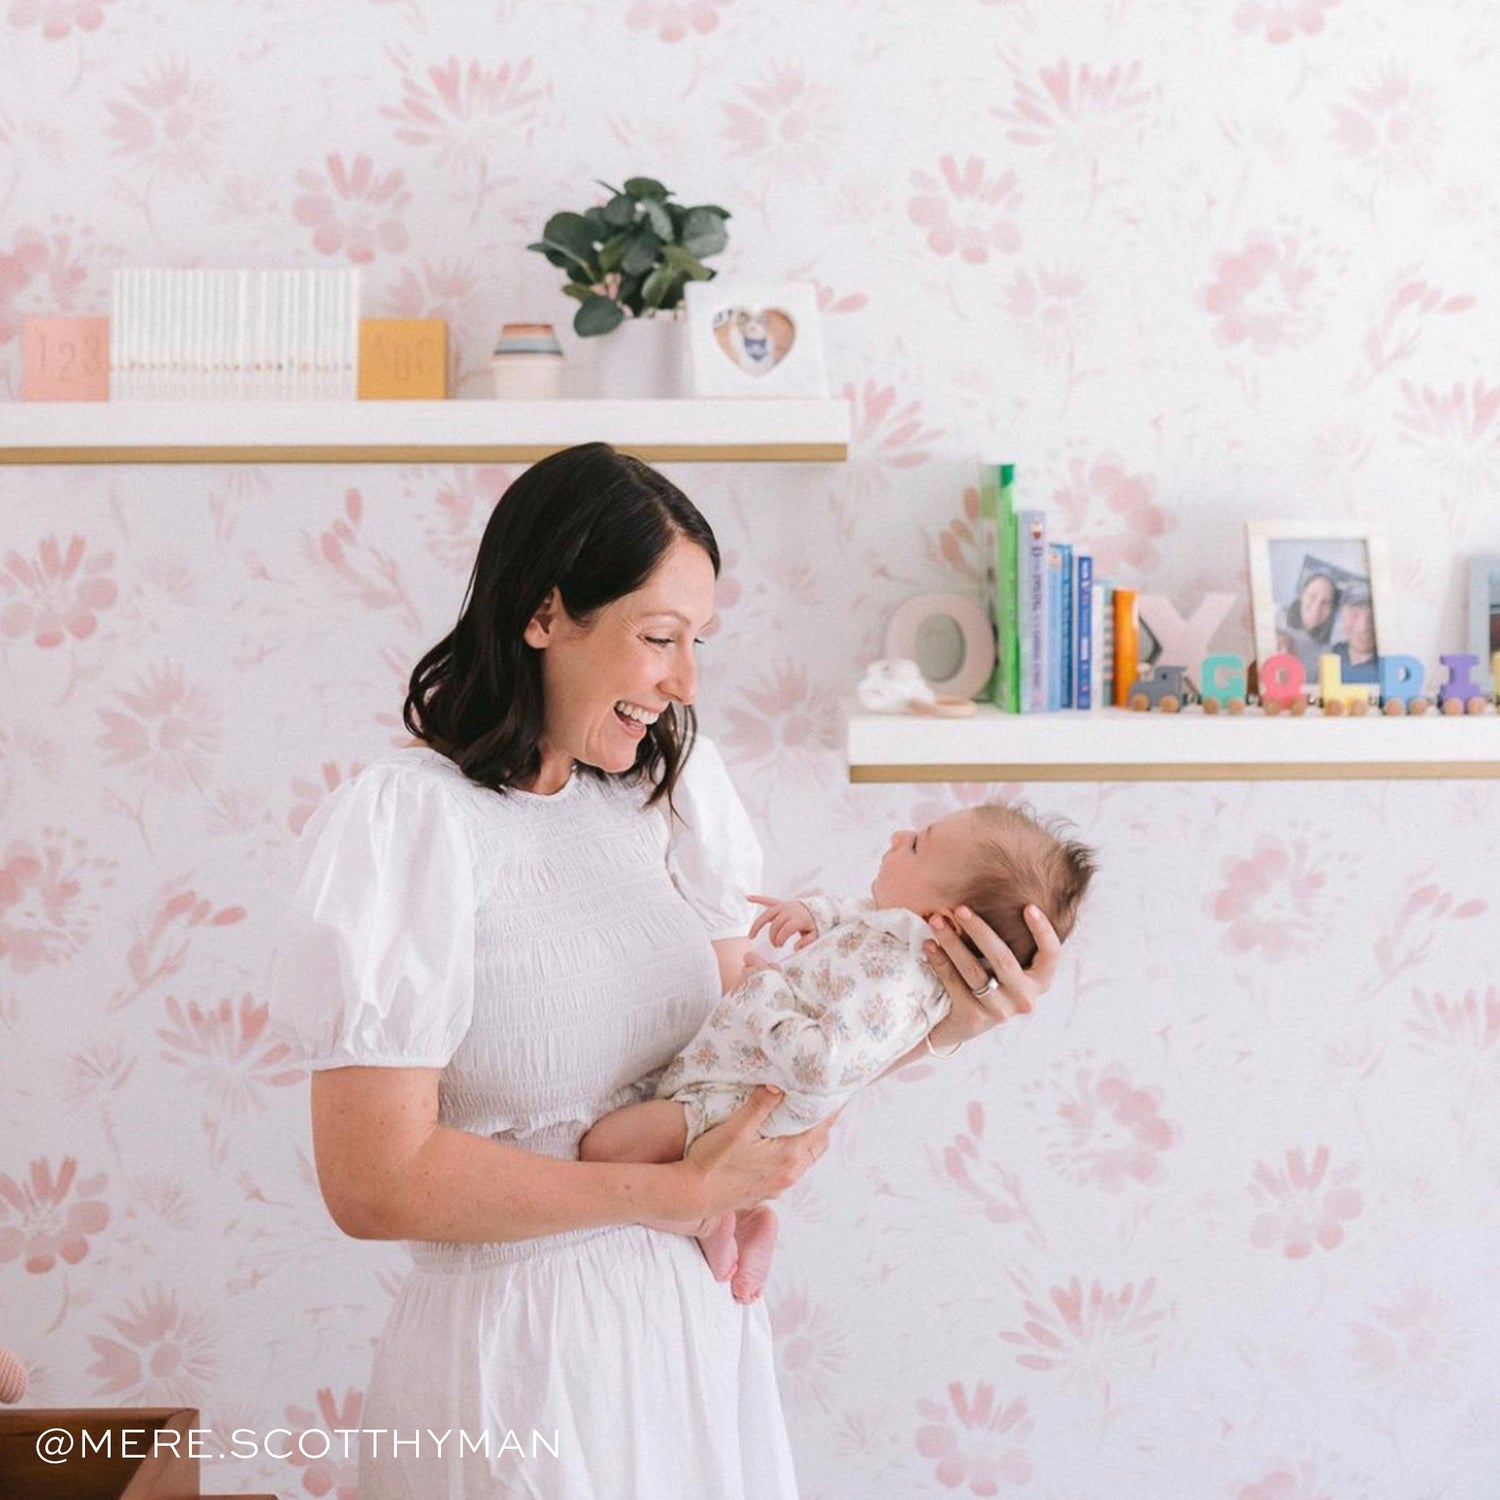 Brunette woman holding baby in front of a pink floral custom wallpaper. Photo taken by Mere Scotthyman  